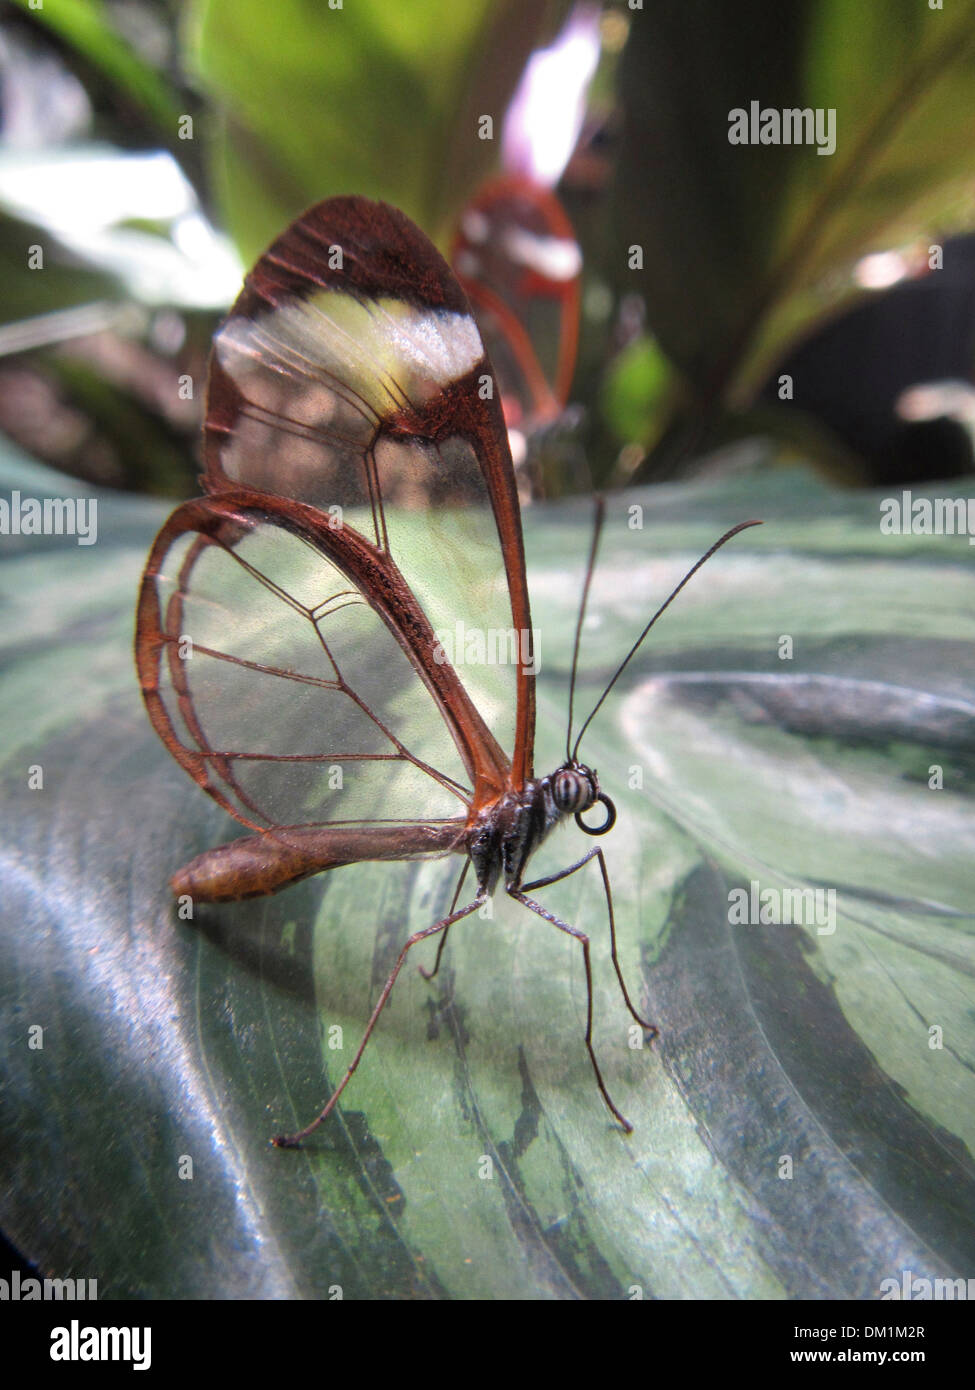 Glasswing Butterfly. The Glasswinged butterfly is a brush-footed butterfly, and is a member of the subfamily Danainae. Stock Photo